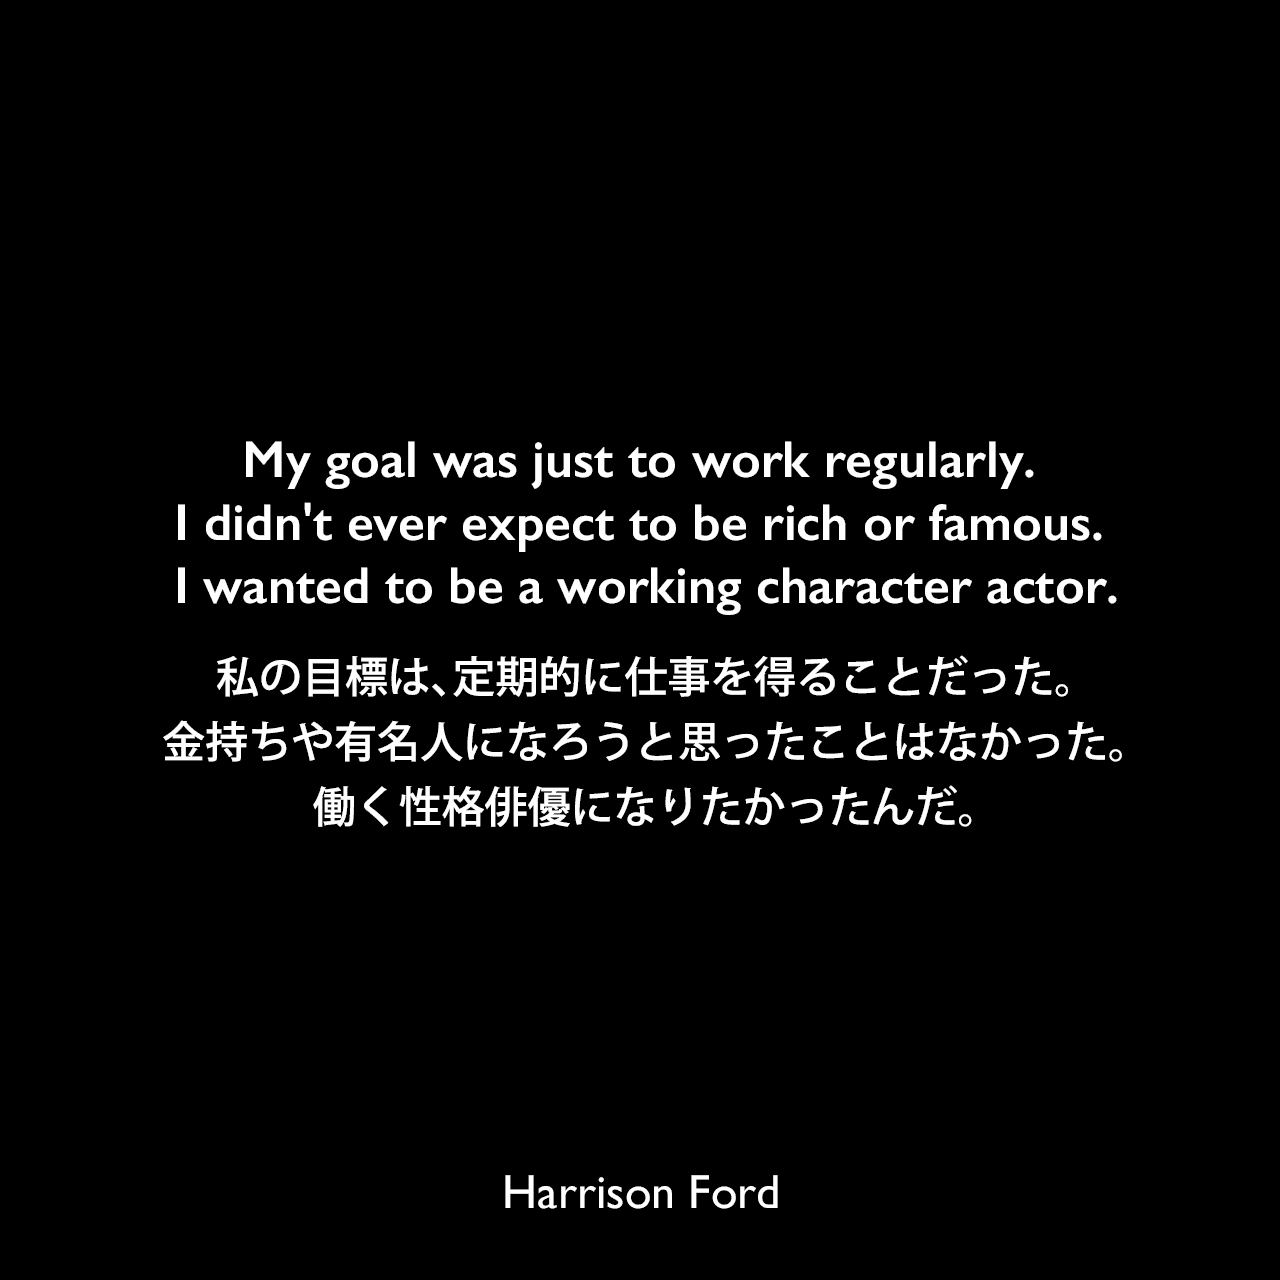 My goal was just to work regularly. I didn't ever expect to be rich or famous. I wanted to be a working character actor.私の目標は、定期的に仕事を得ることだった。金持ちや有名人になろうと思ったことはなかった。働く性格俳優になりたかったんだ。Harrison Ford